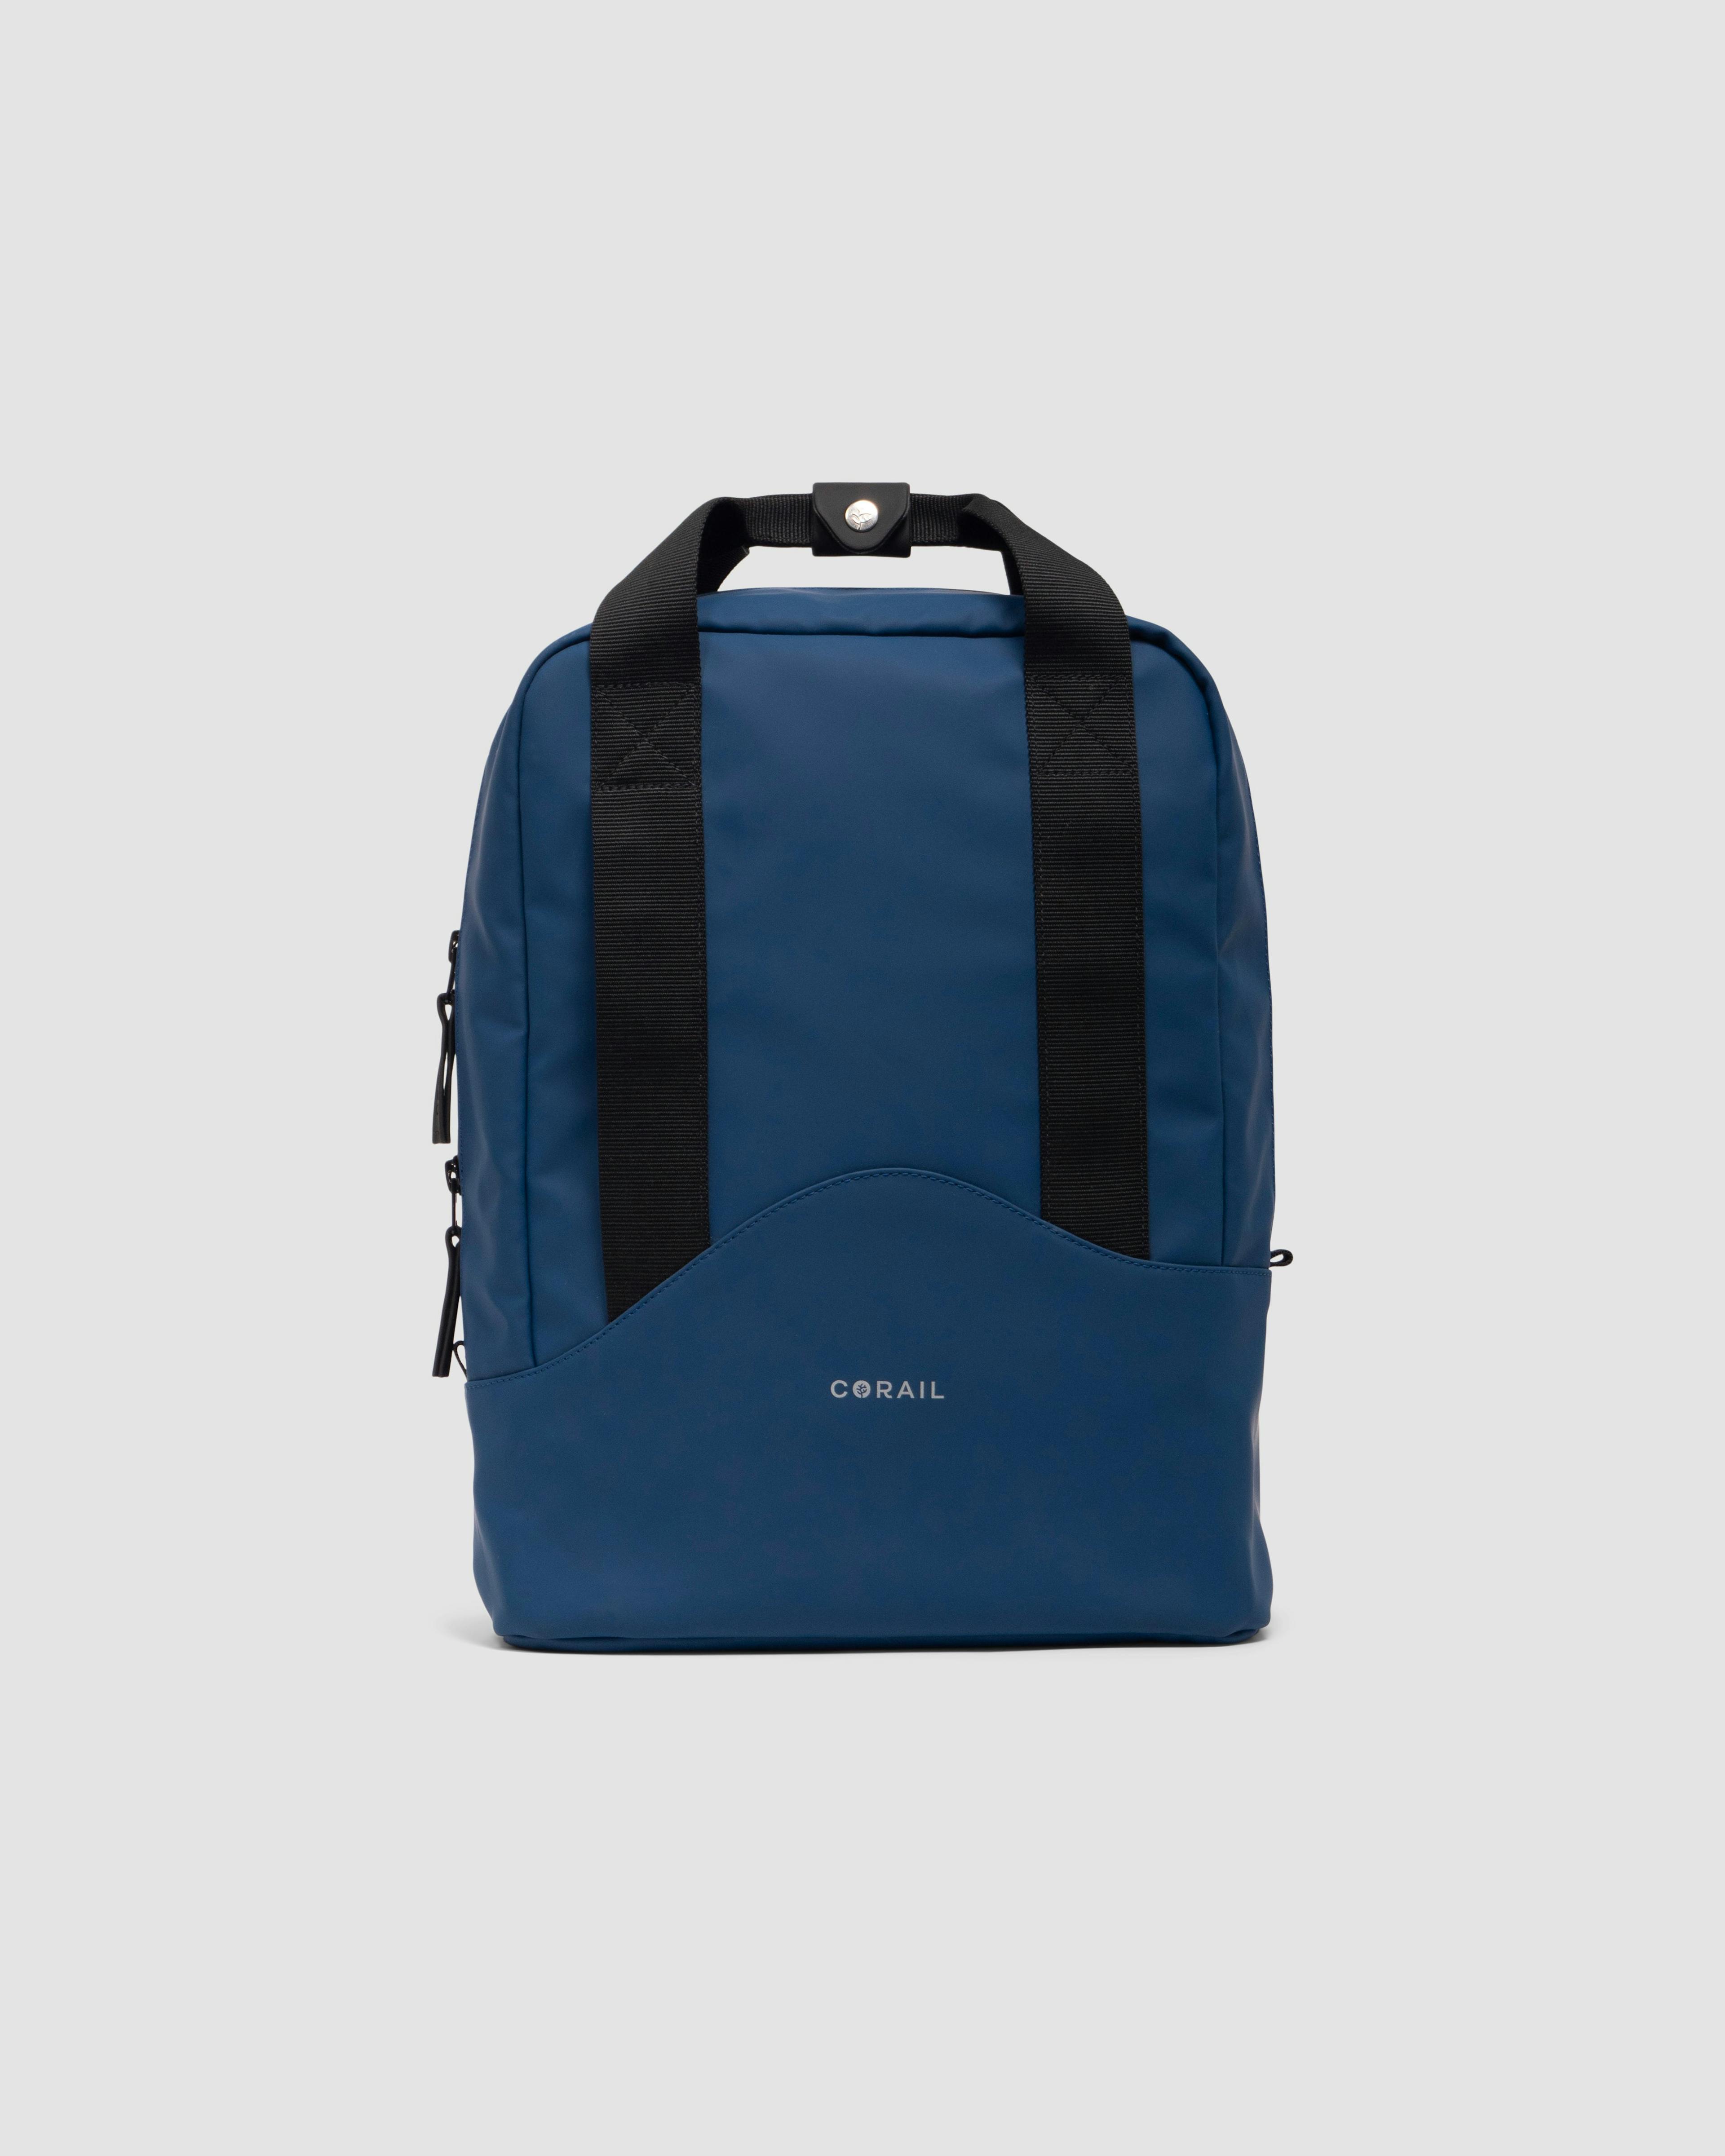 Marseille City Blue | Recycled Plastic Bottle Waterproof Backpack